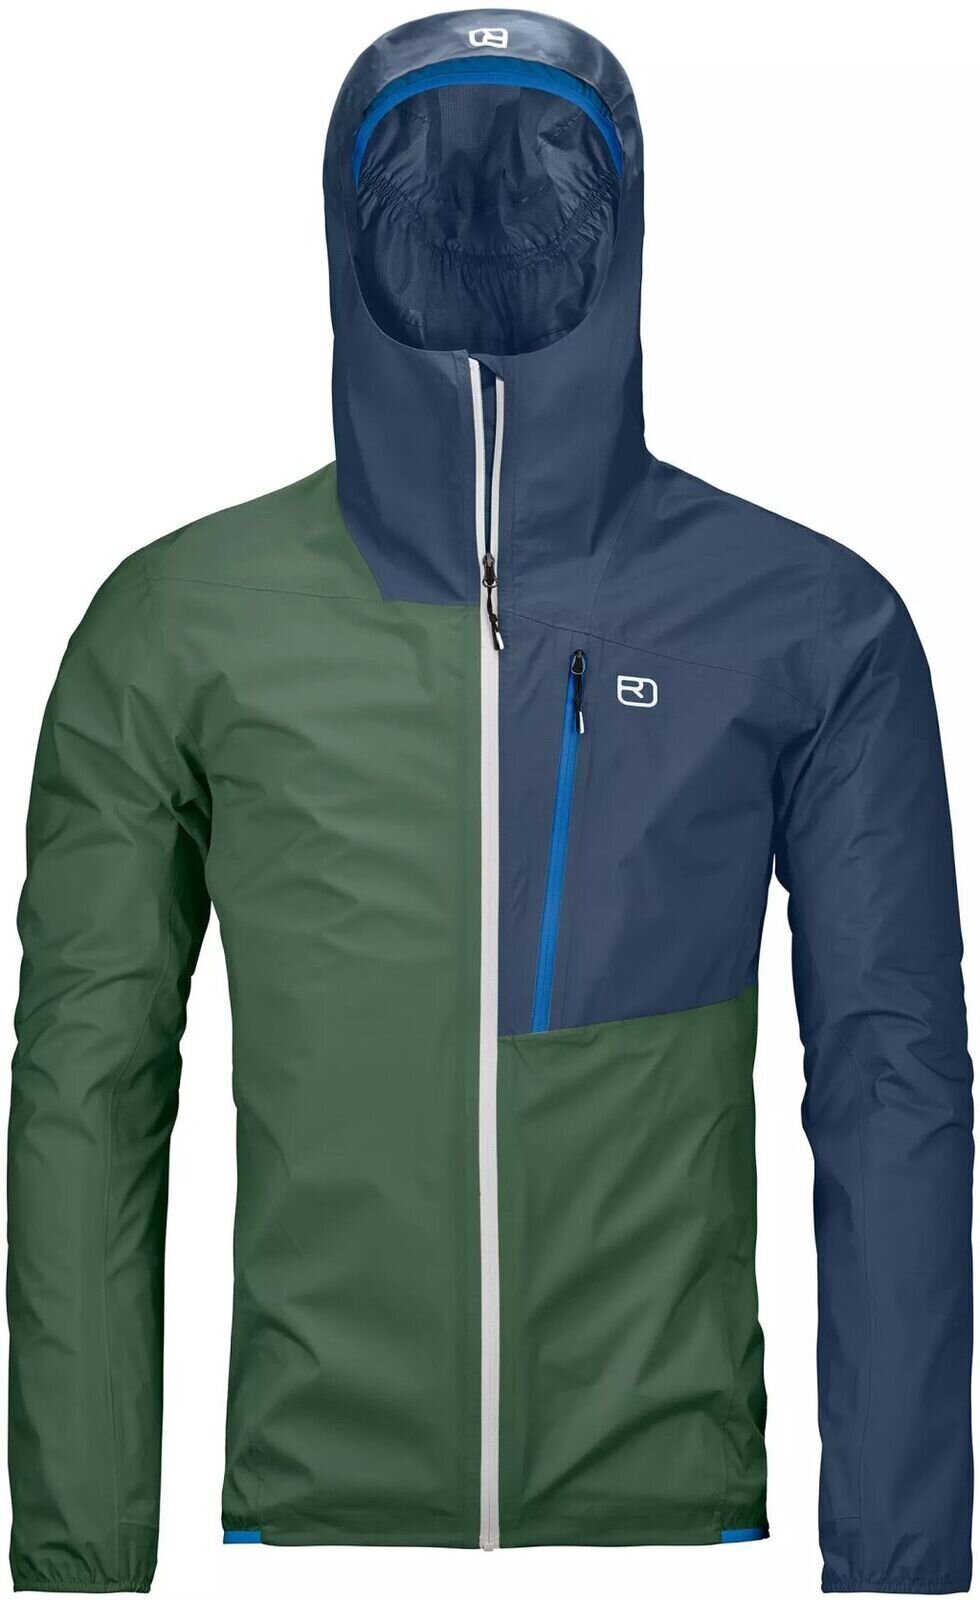 Outdoor Jacket Ortovox 2.5L Civetta M Green Forest M Outdoor Jacket